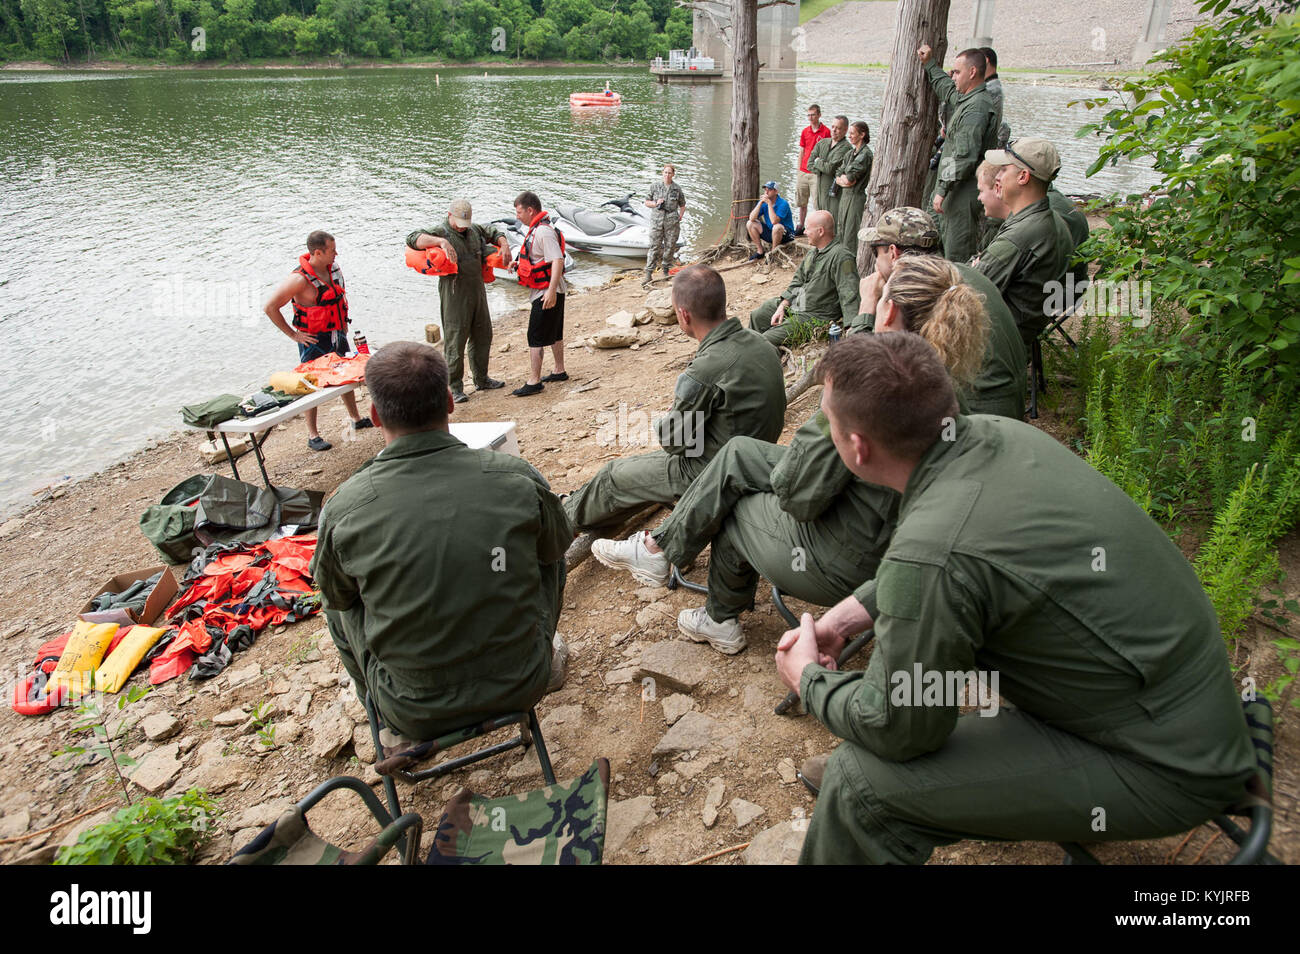 Aircrew members from the Kentucky Air National Guard’s 123rd Airlift Wing receive survival training at Taylorsville Lake in Taylorsville, Ky., on June 5, 2014. The training covered both land and water survival techniques, as well as orienteering. (U.S. Air National Guard photo by Maj. Dale Greer) Stock Photo